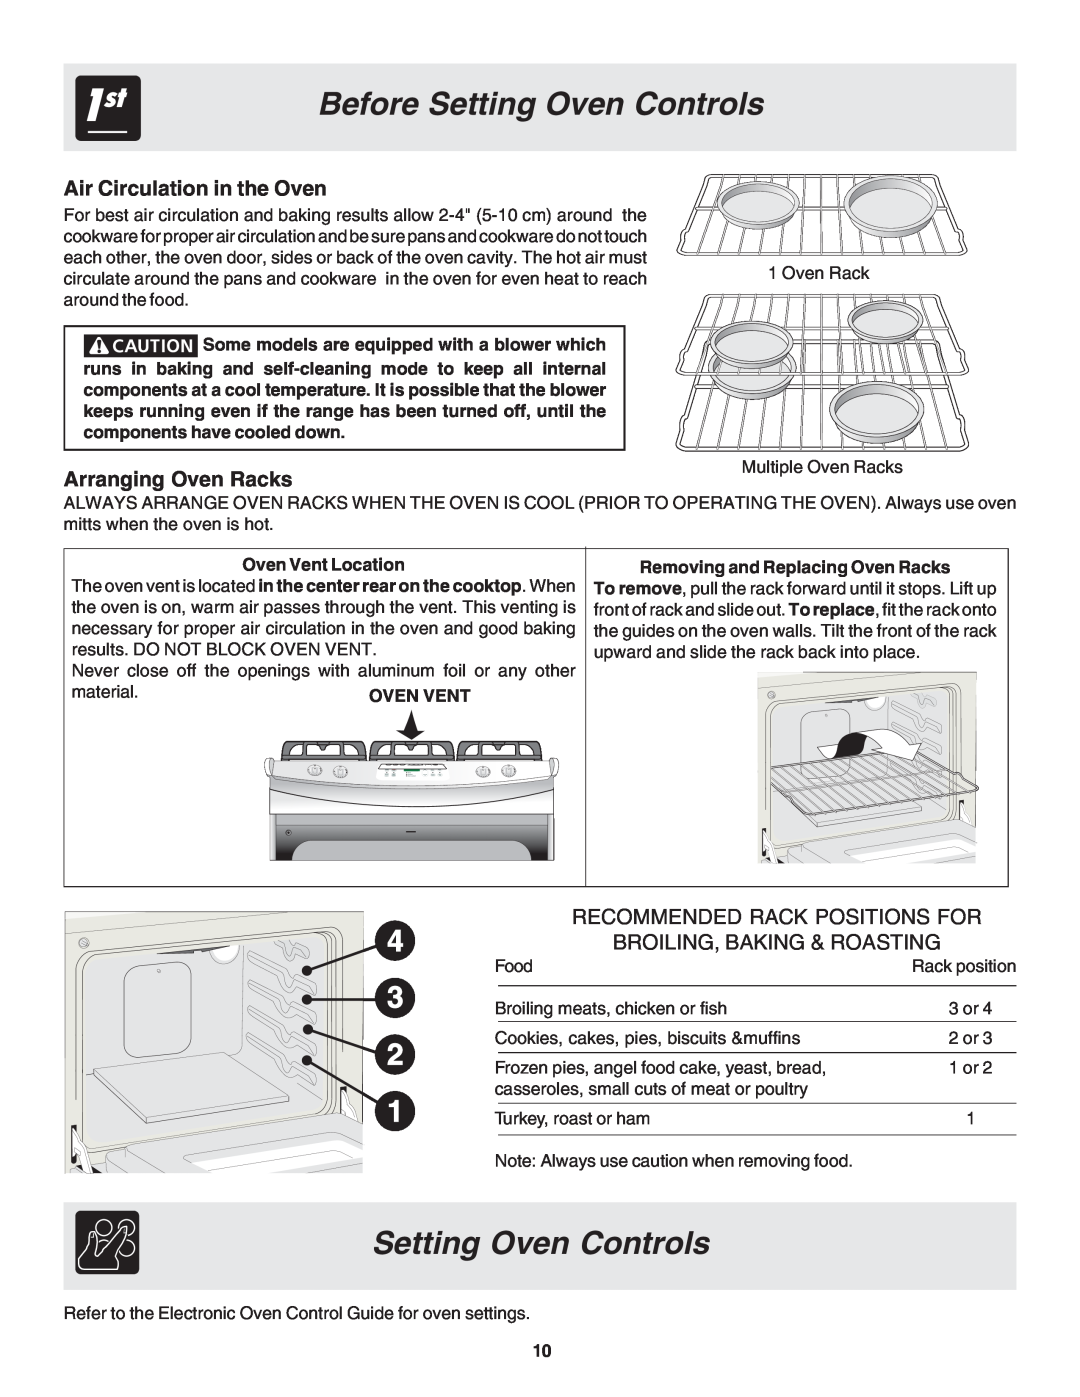 Frigidaire 318203873 Before Setting Oven Controls, Air Circulation in the Oven, Arranging Oven Racks, Oven Vent Location 